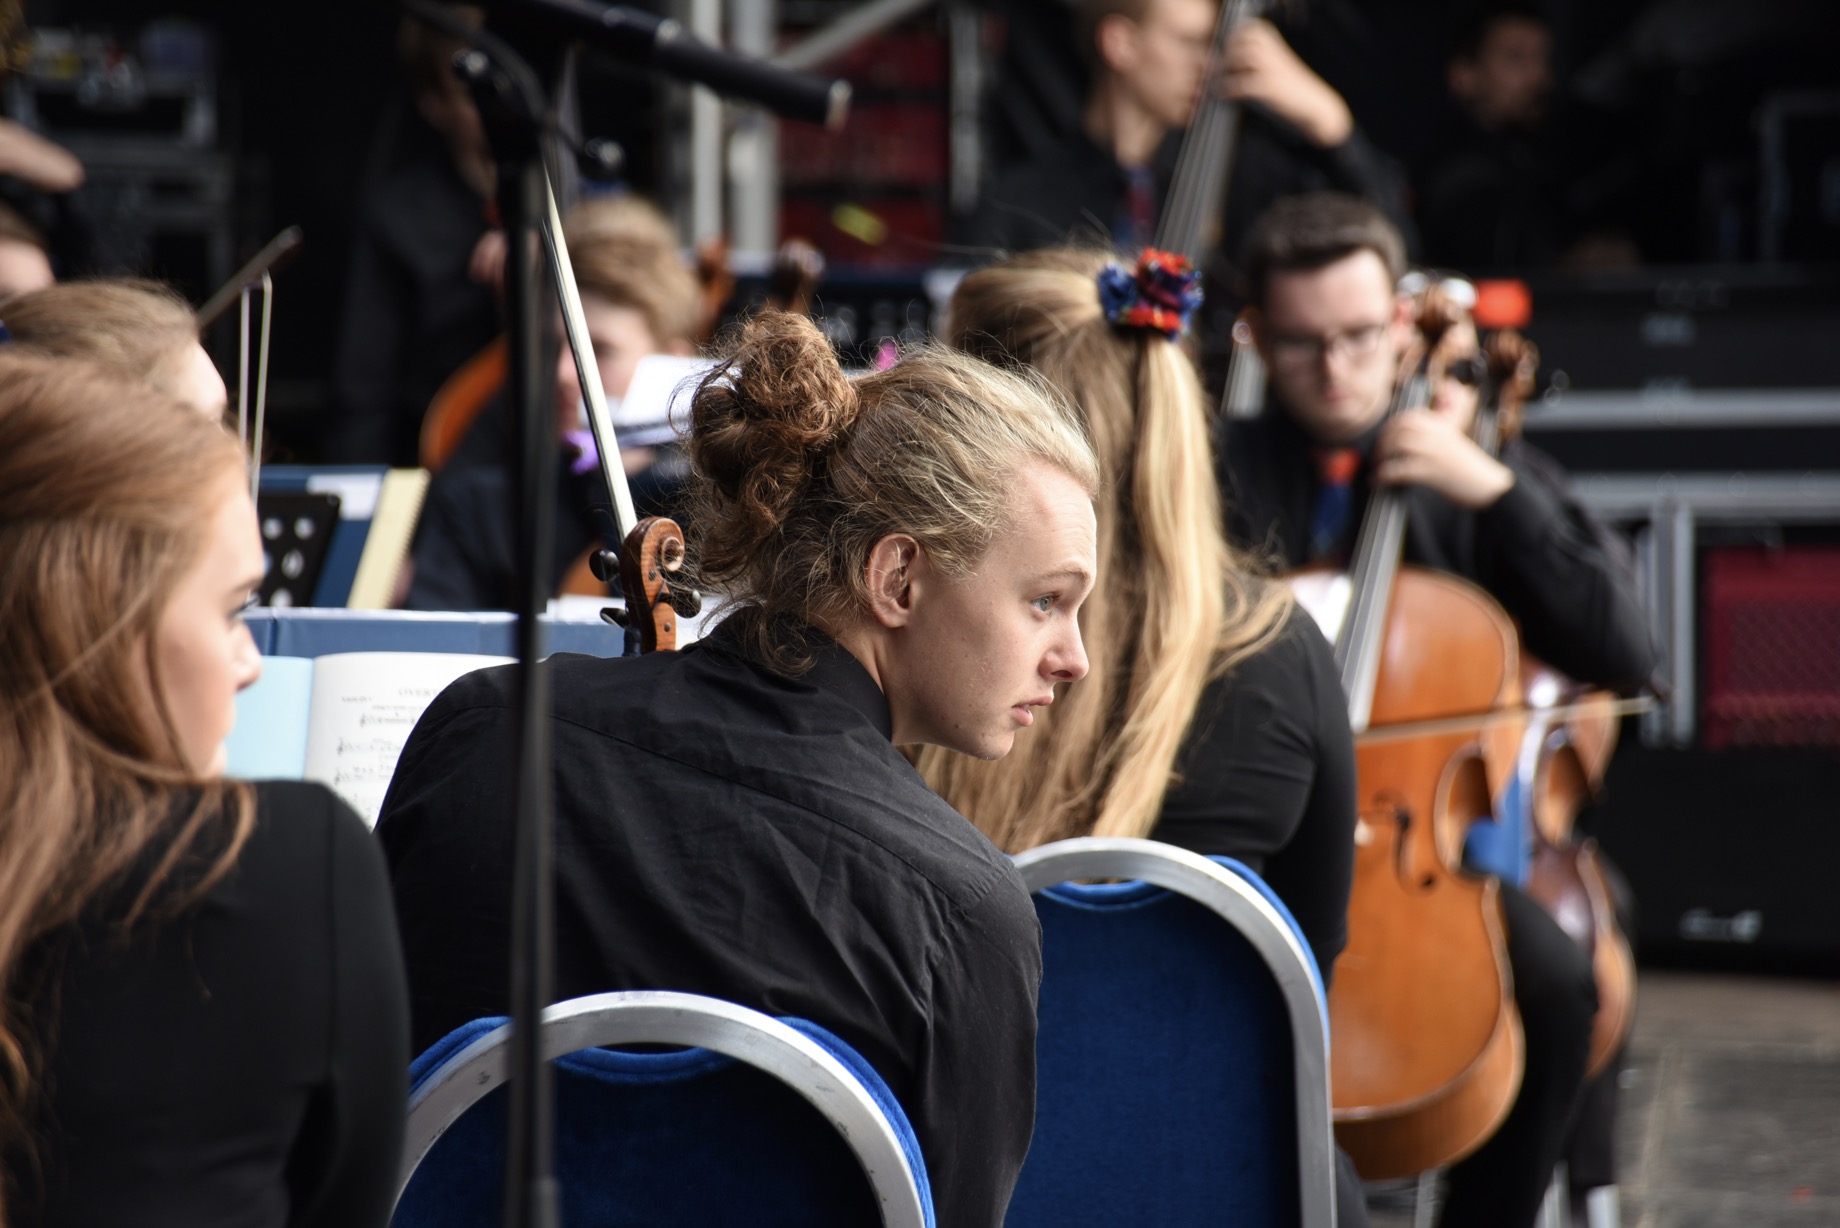 Violinist Ruaridh Geddes looks on at the audience in Glasgow\'s George Square as anticipation grows for the opening piece of a special Gala Concert. Part of the European Champioship Games Cultural Festival, August 2018.